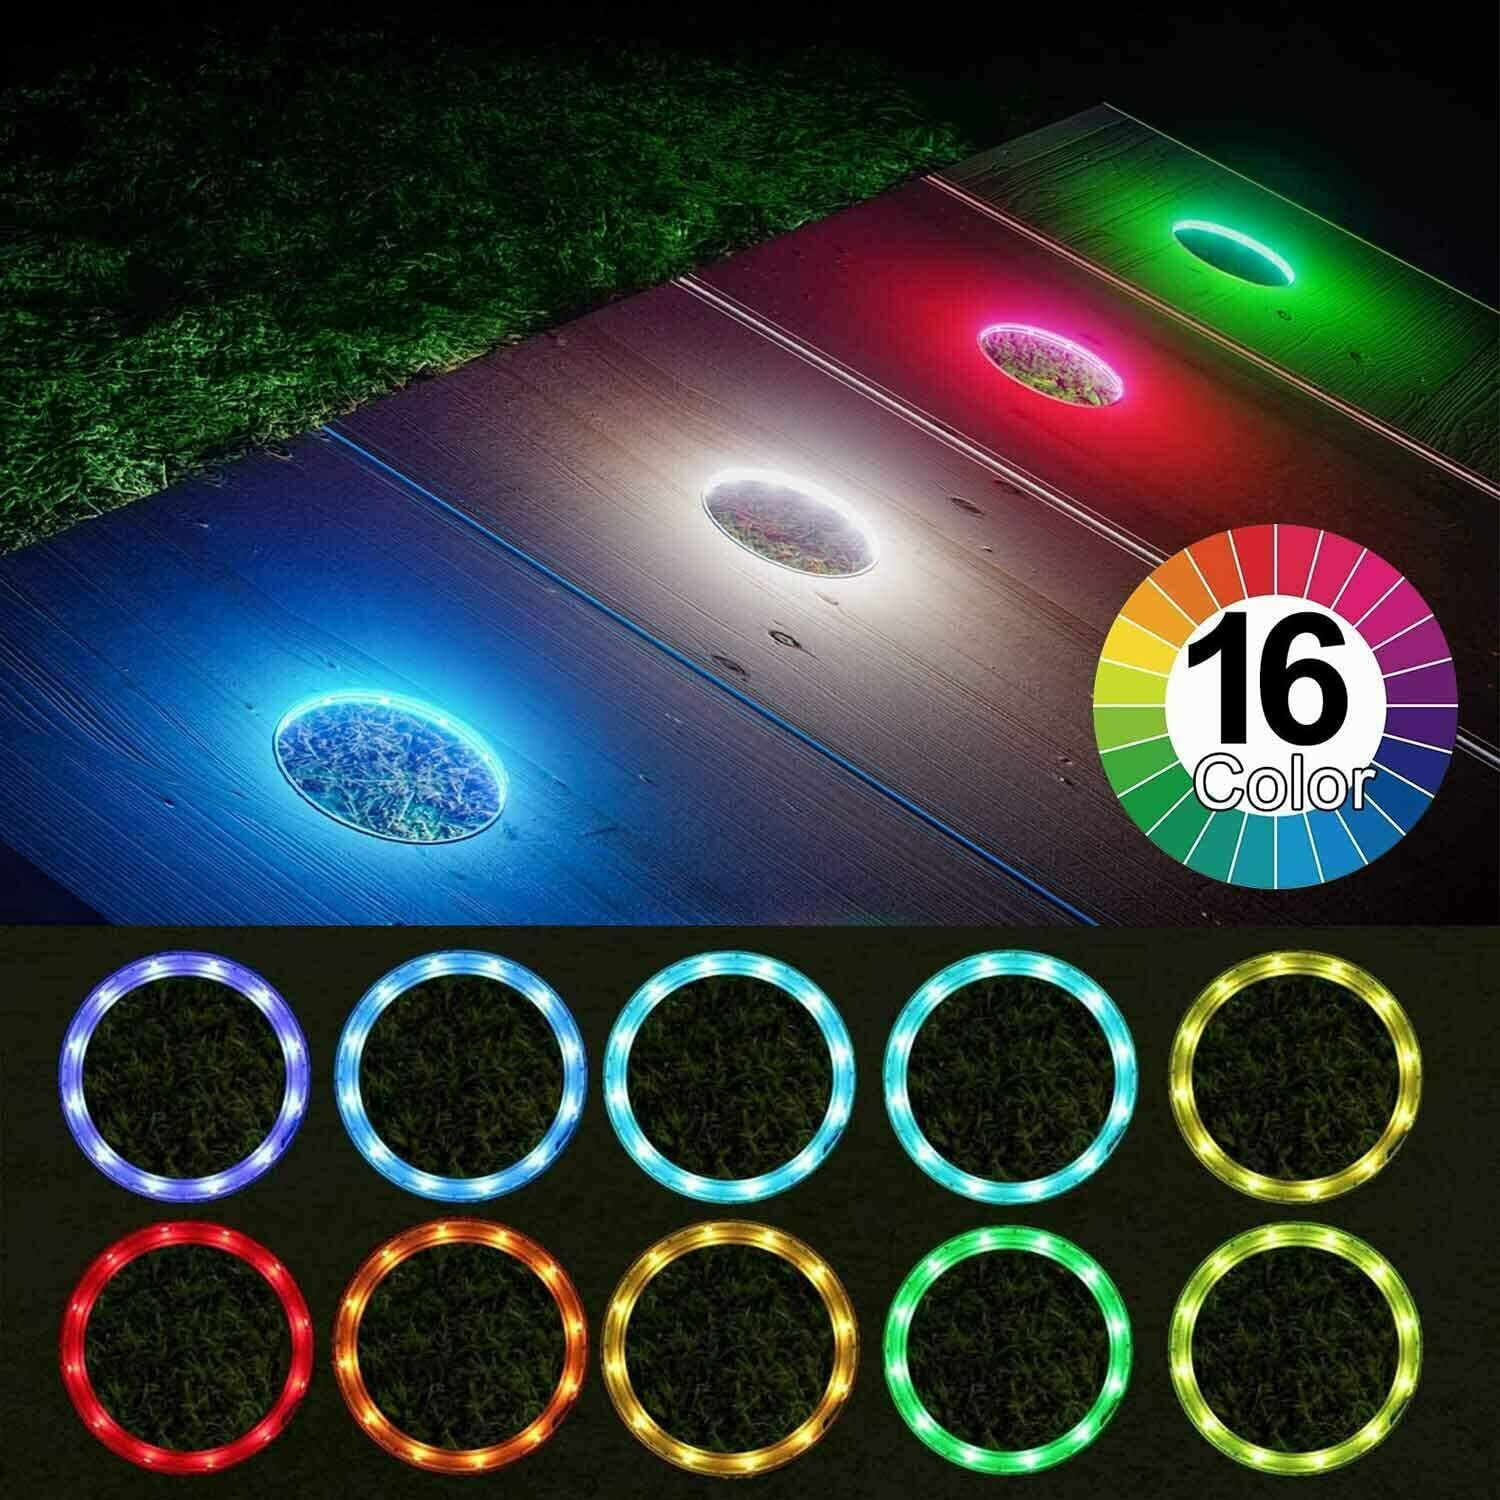 GSPNGFGI LED Cornhole Lights,2 Sets 16 Change Colors 4 Modes LED Timered Corn Hole Light,Remote Control Cornhole Board Edge and Ring LED Lights for Playing Bean Bag Toss Cornhole Game Outdoor at Night 